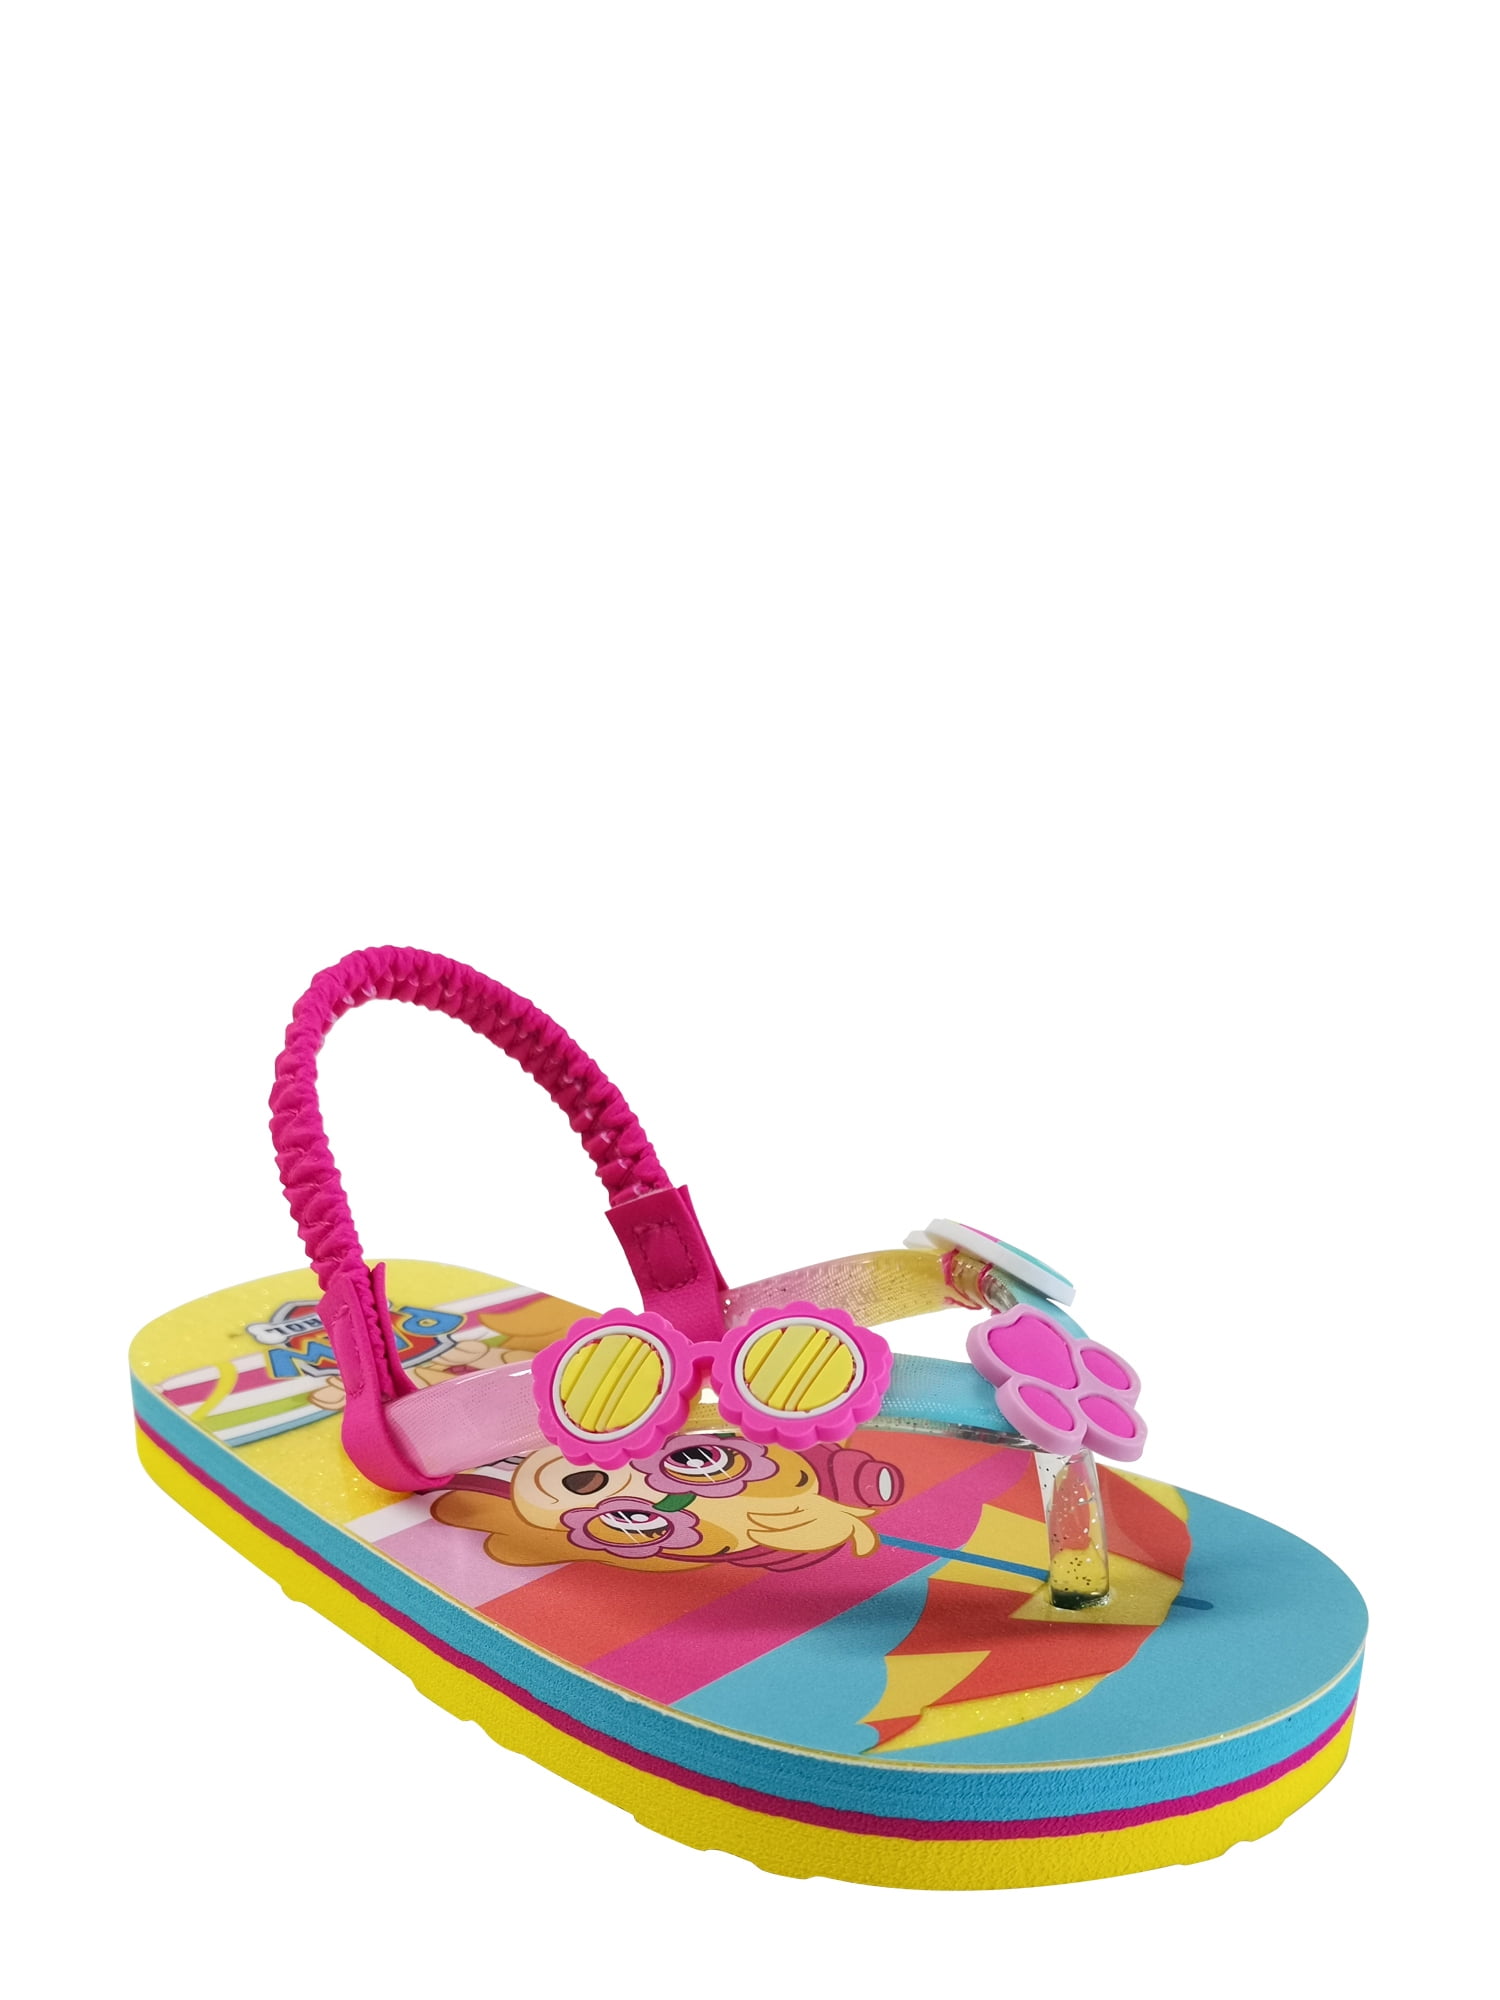 ACI Paw Patrol Boys Flip-Flops Sandals with Chase Marshall 